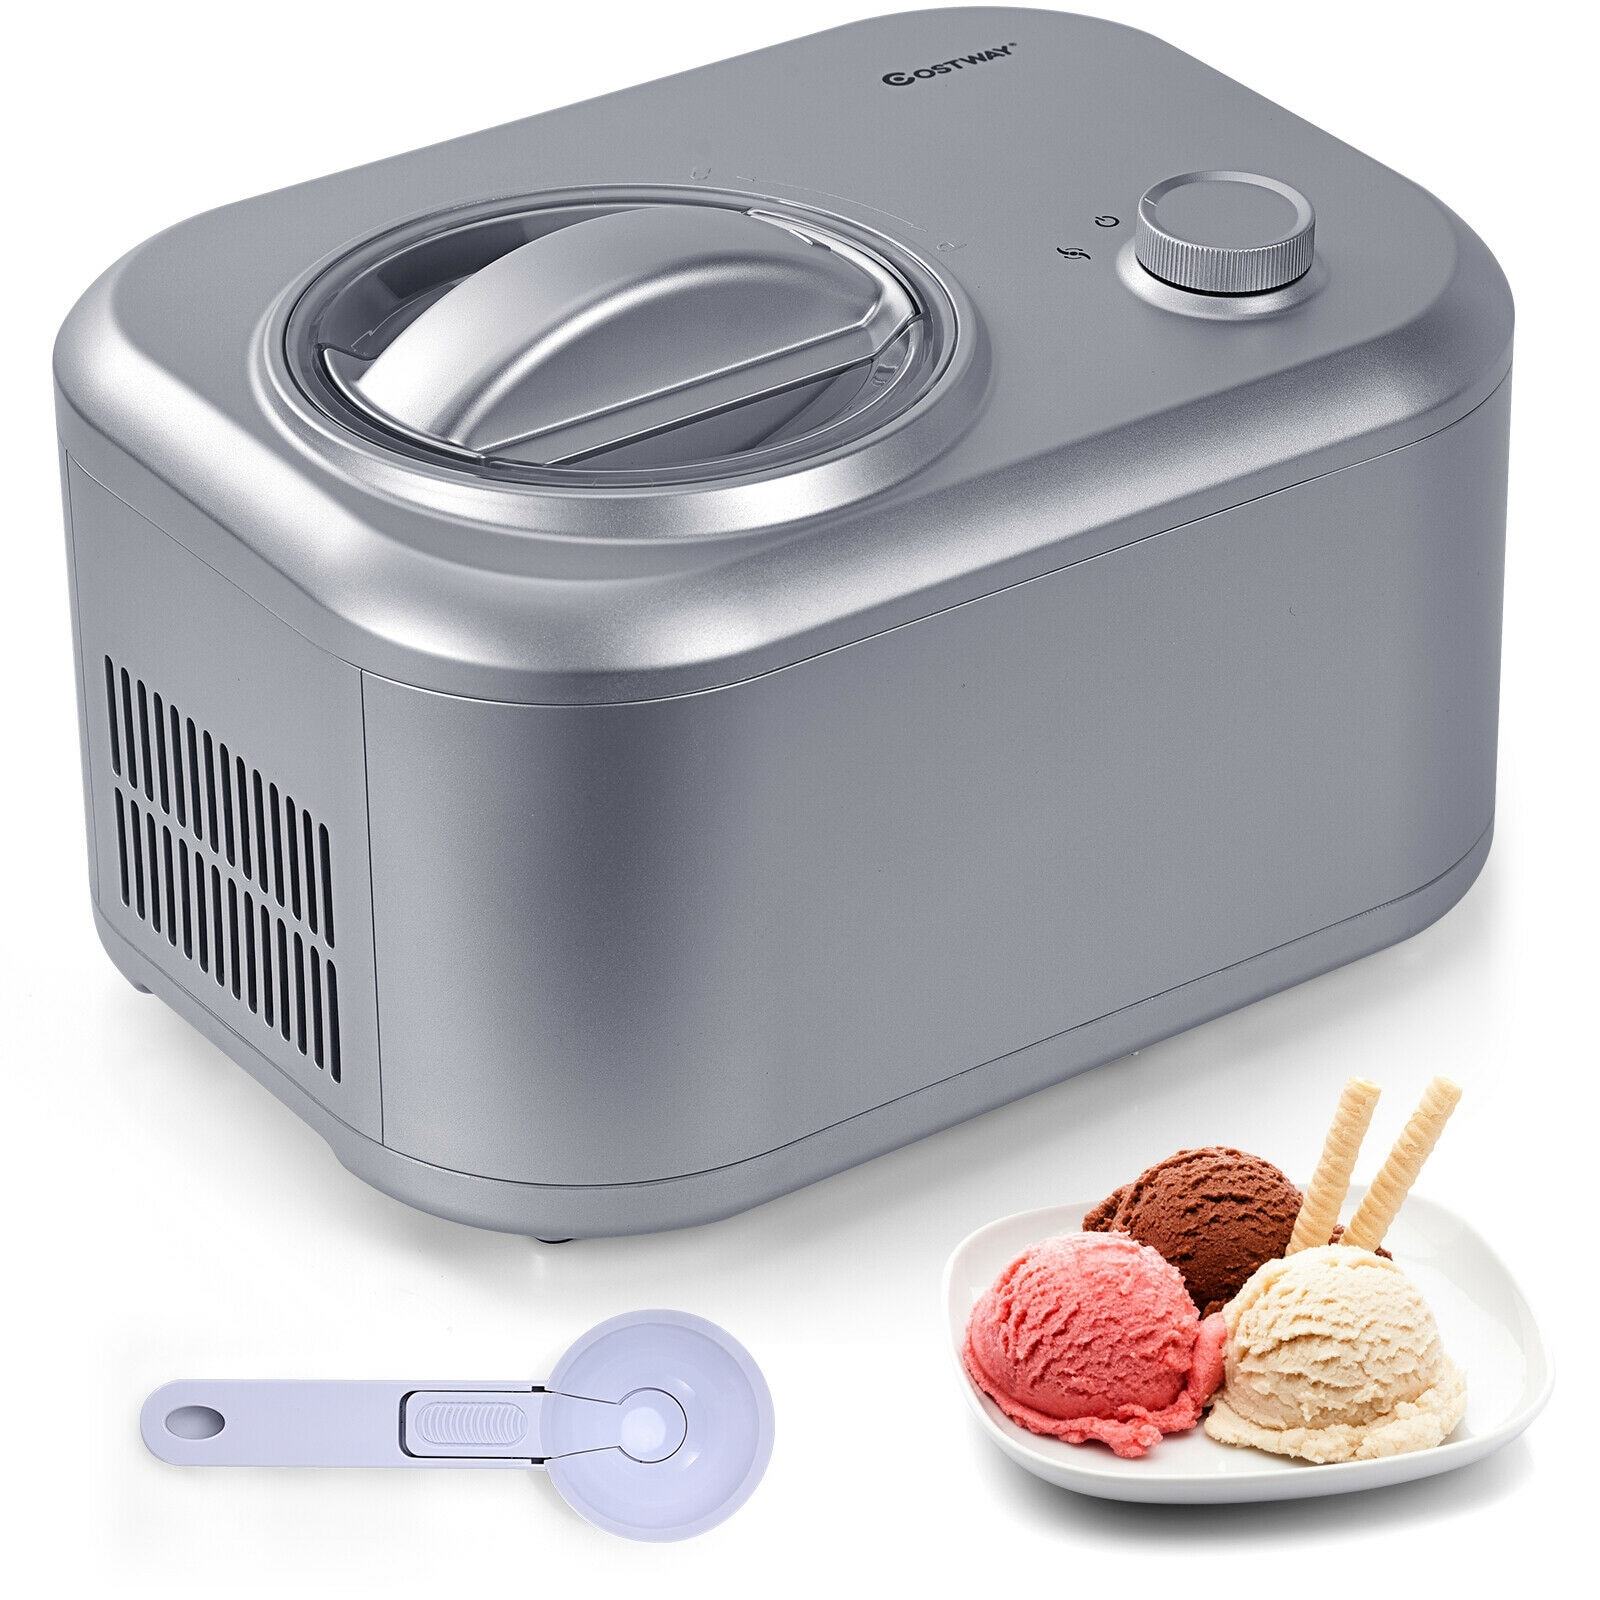 CASAINC 1.1 QT Ice Cream Automatic Machine with Spoon,Sliver in the Ice Cream Makers department at Lowes.com